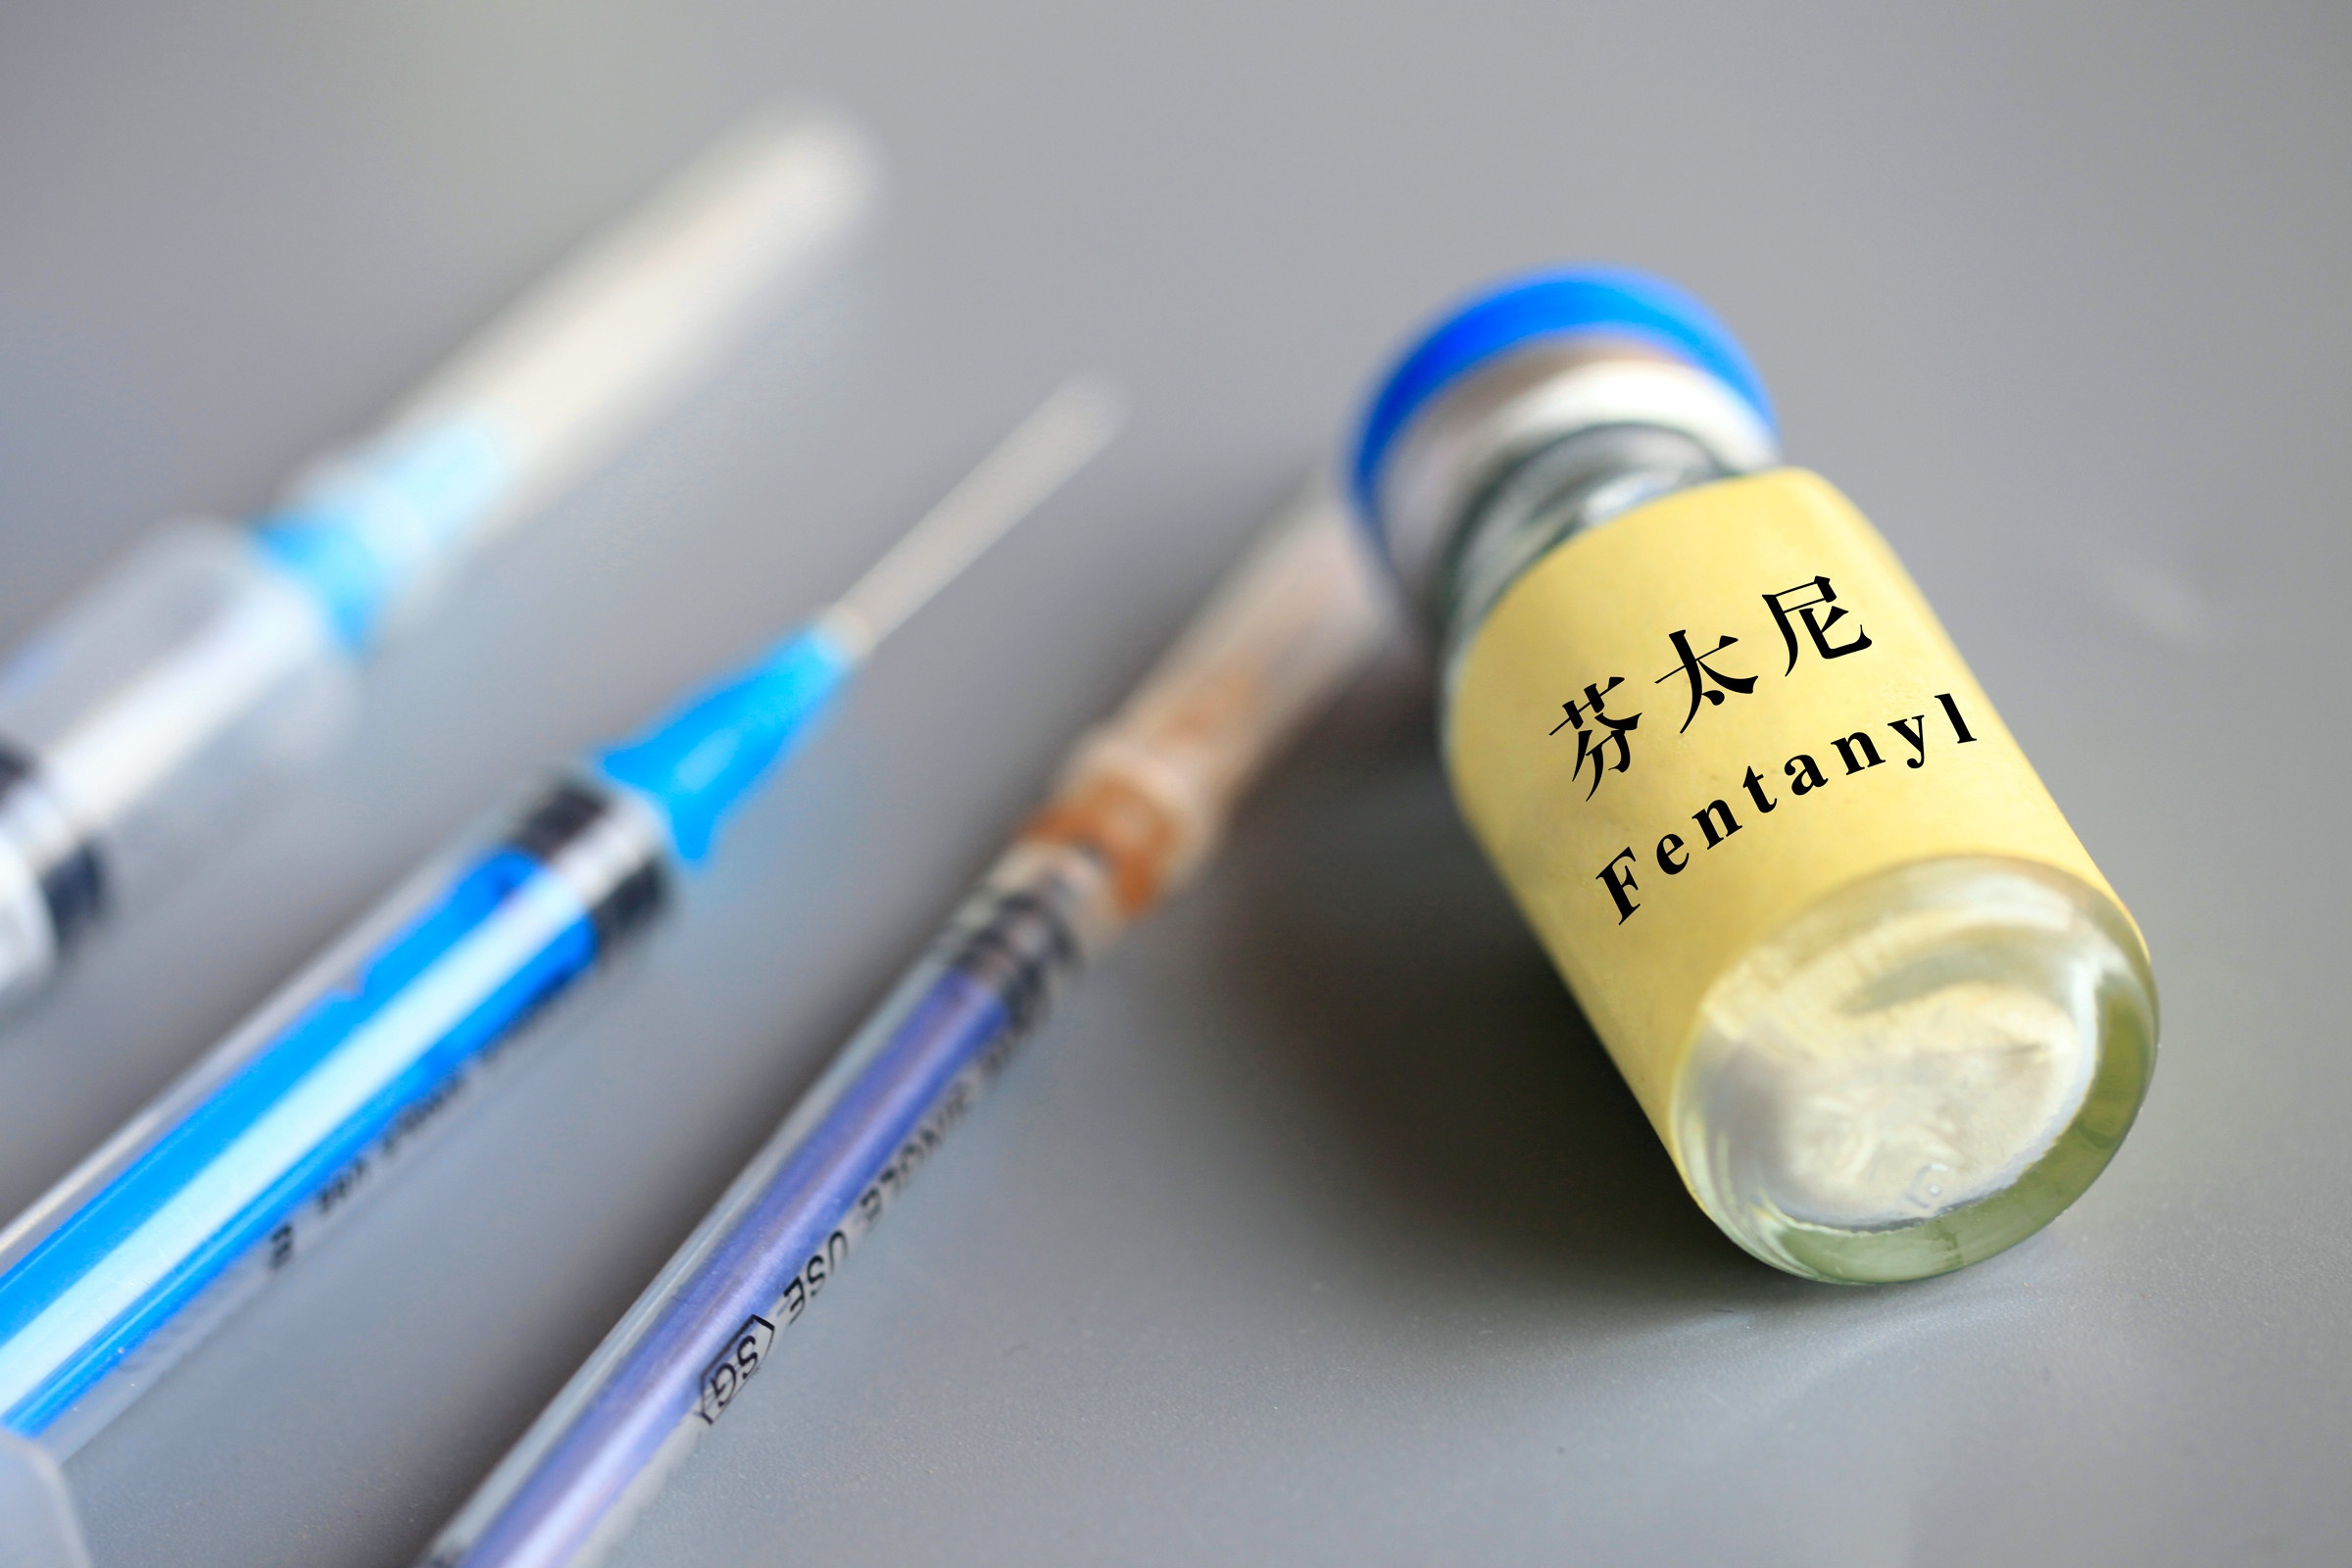 --FILE--A bottle of Fentanyl pharmaceuticals is displayed in Anyang city, central China's Henan province, 12 November 2018. China will add fentanyl-related substances to a supplementary list of controlled narcotic drugs and psychotropic substances with non-medical use since May 1. The decision was announced Monday in a joint statement by the Ministry of Public Security, the National Health Commission and the National Medical Products Administration. Fentanyl and its analogues that were previously included in the list of controlled narcotic drugs and psychotropic substances, as well as the related substances in the supplementary list, will remain to be controlled according to relevant regulations, the statement said. (Imaginechina via AP Images)